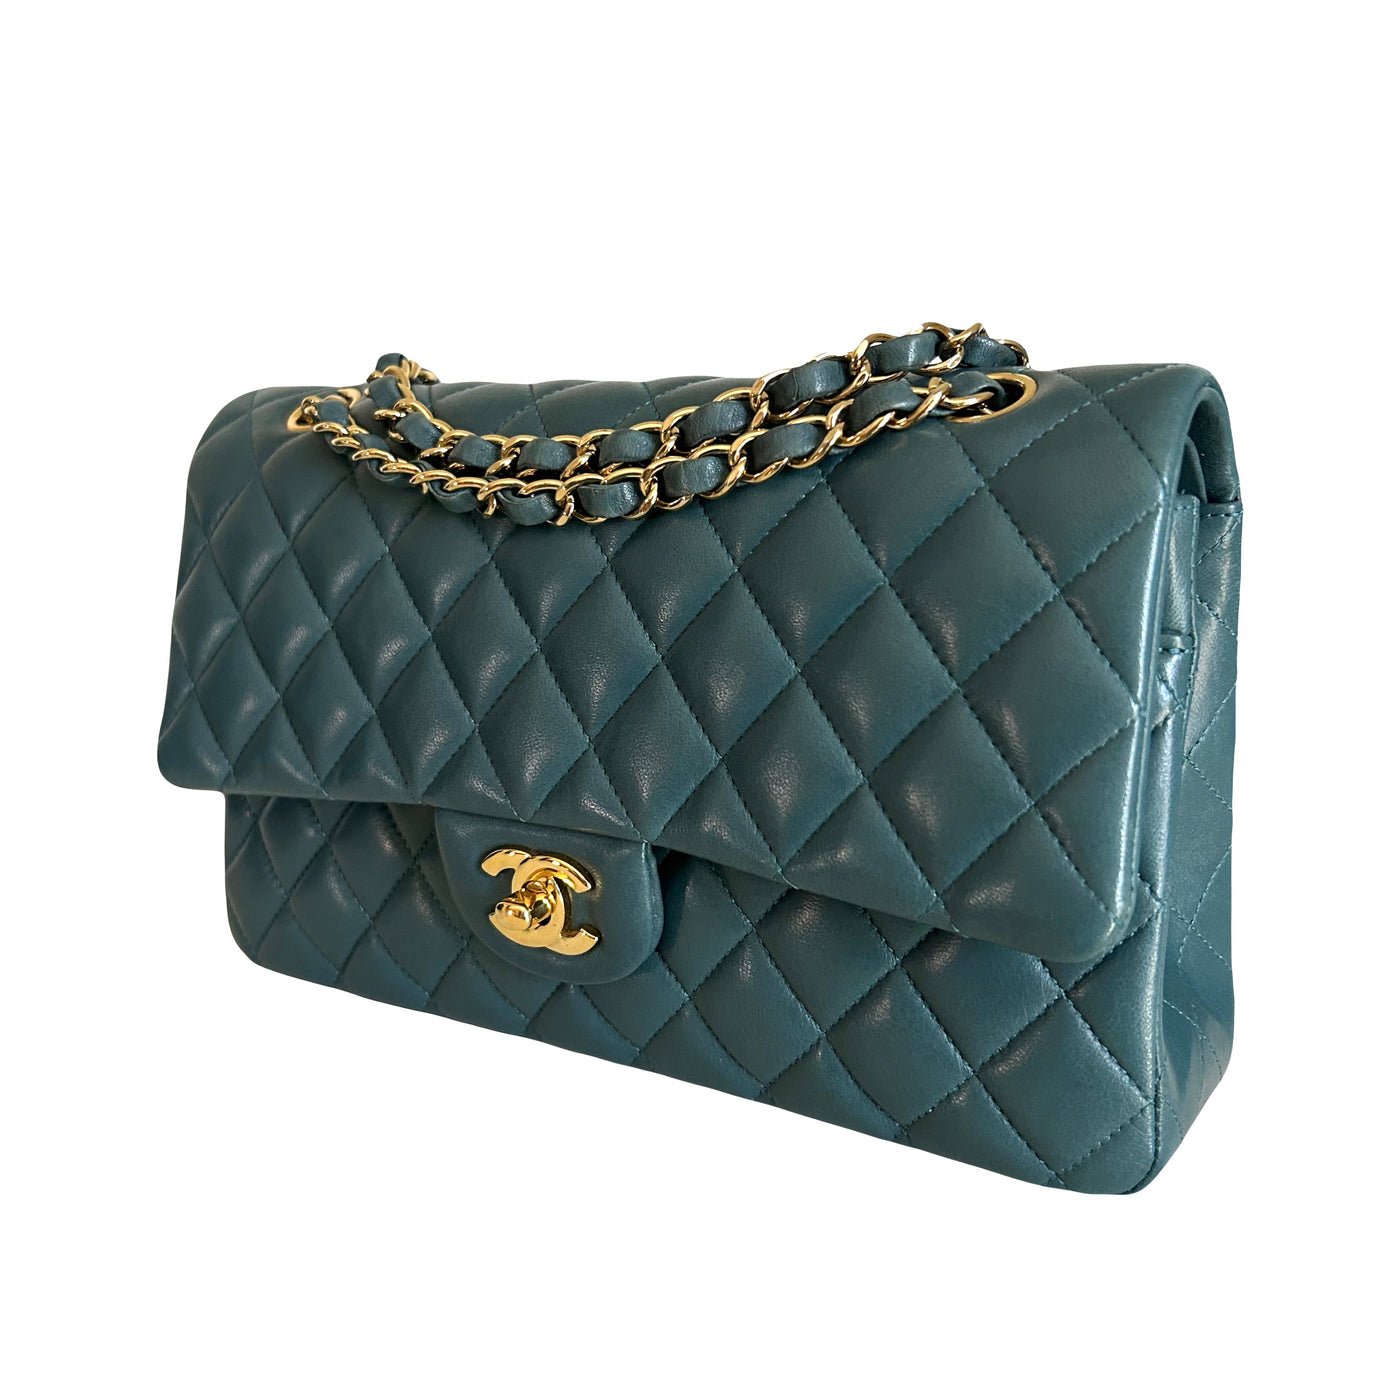 CHANEL medium classic double flap teal lambskin with gold hardware RRP: £8850